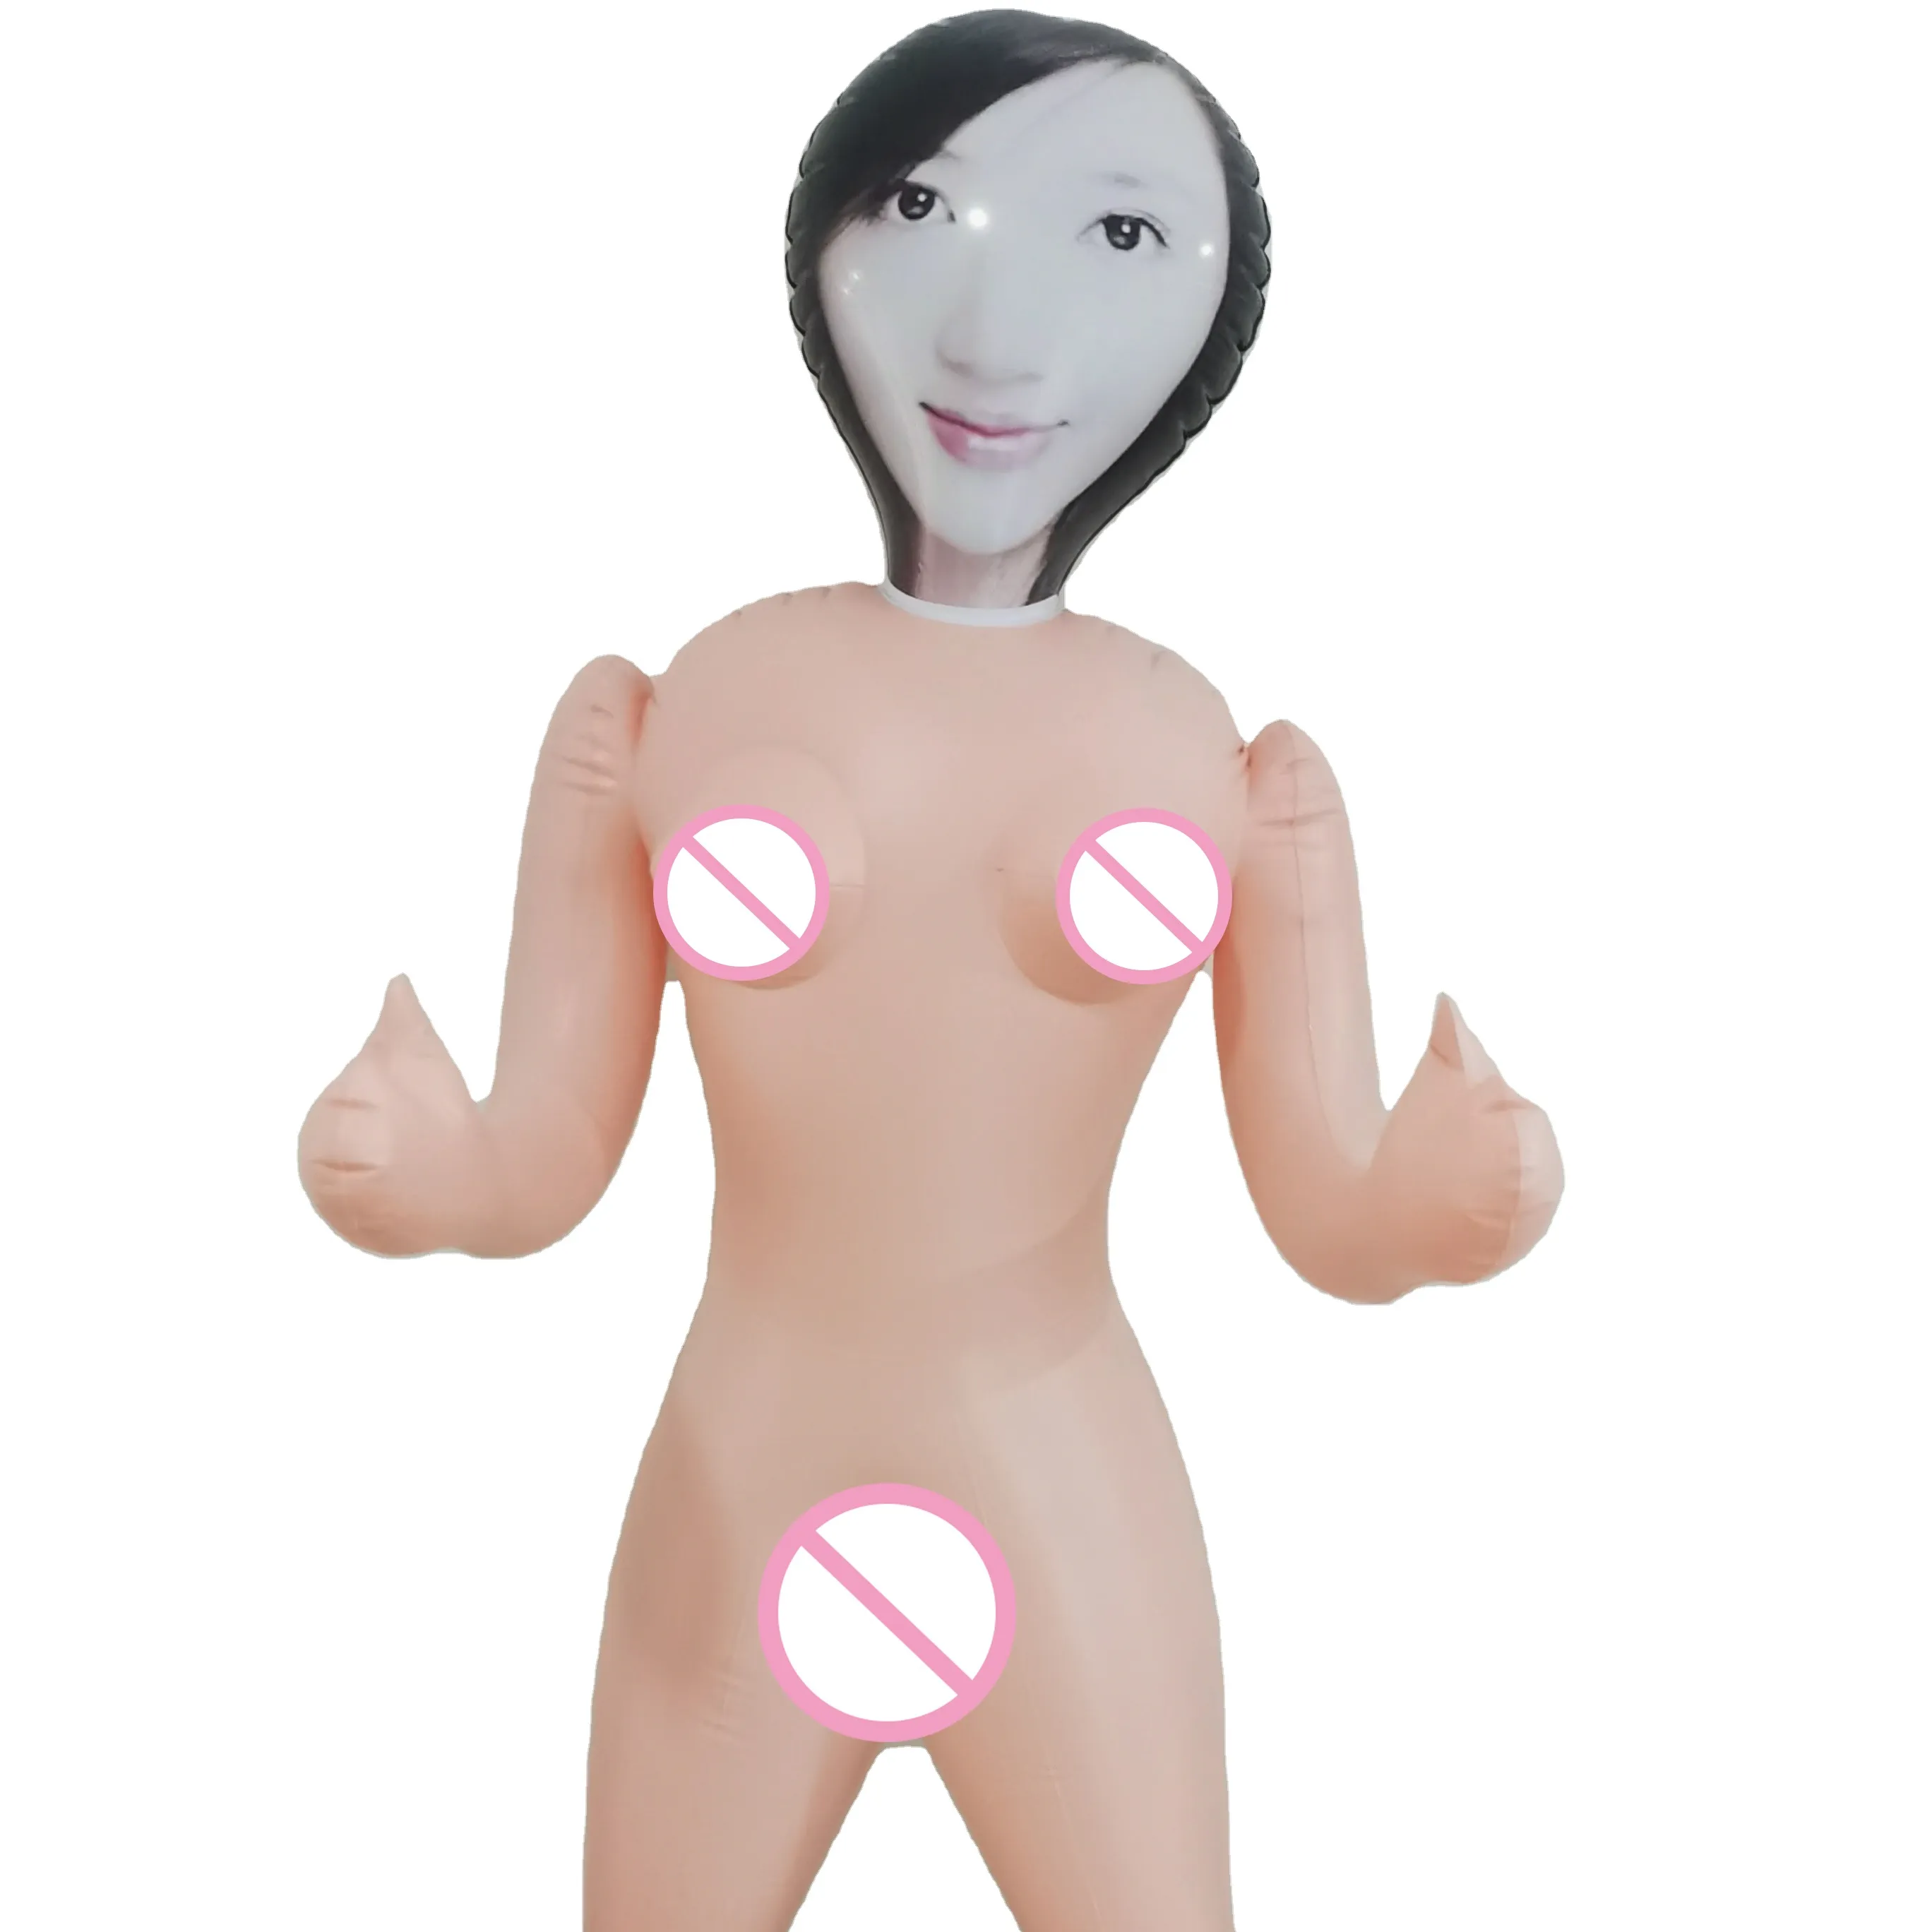 155cm inflatable PVC japanese female blow up sex doll toy blow-up dolls